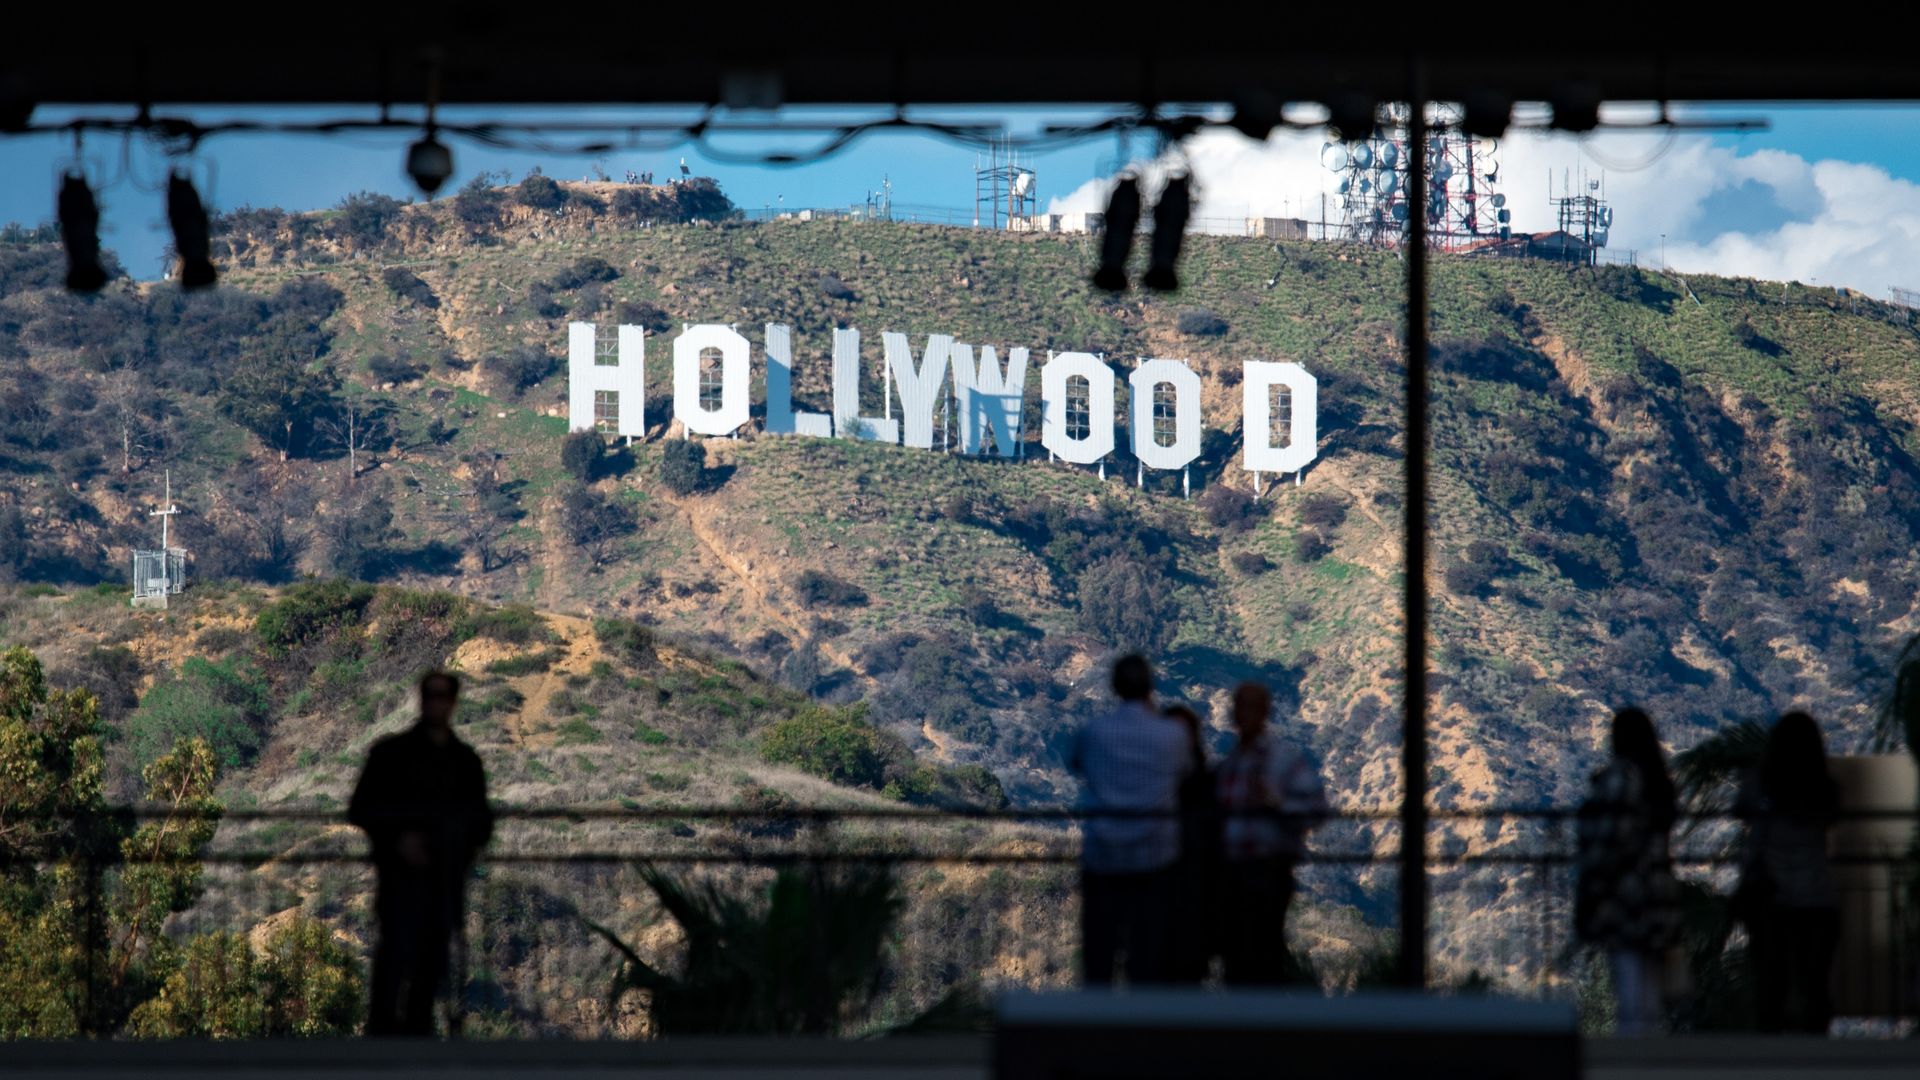 In this image, the Hollywood sign is visible in the background as a man stands and looks at it. 